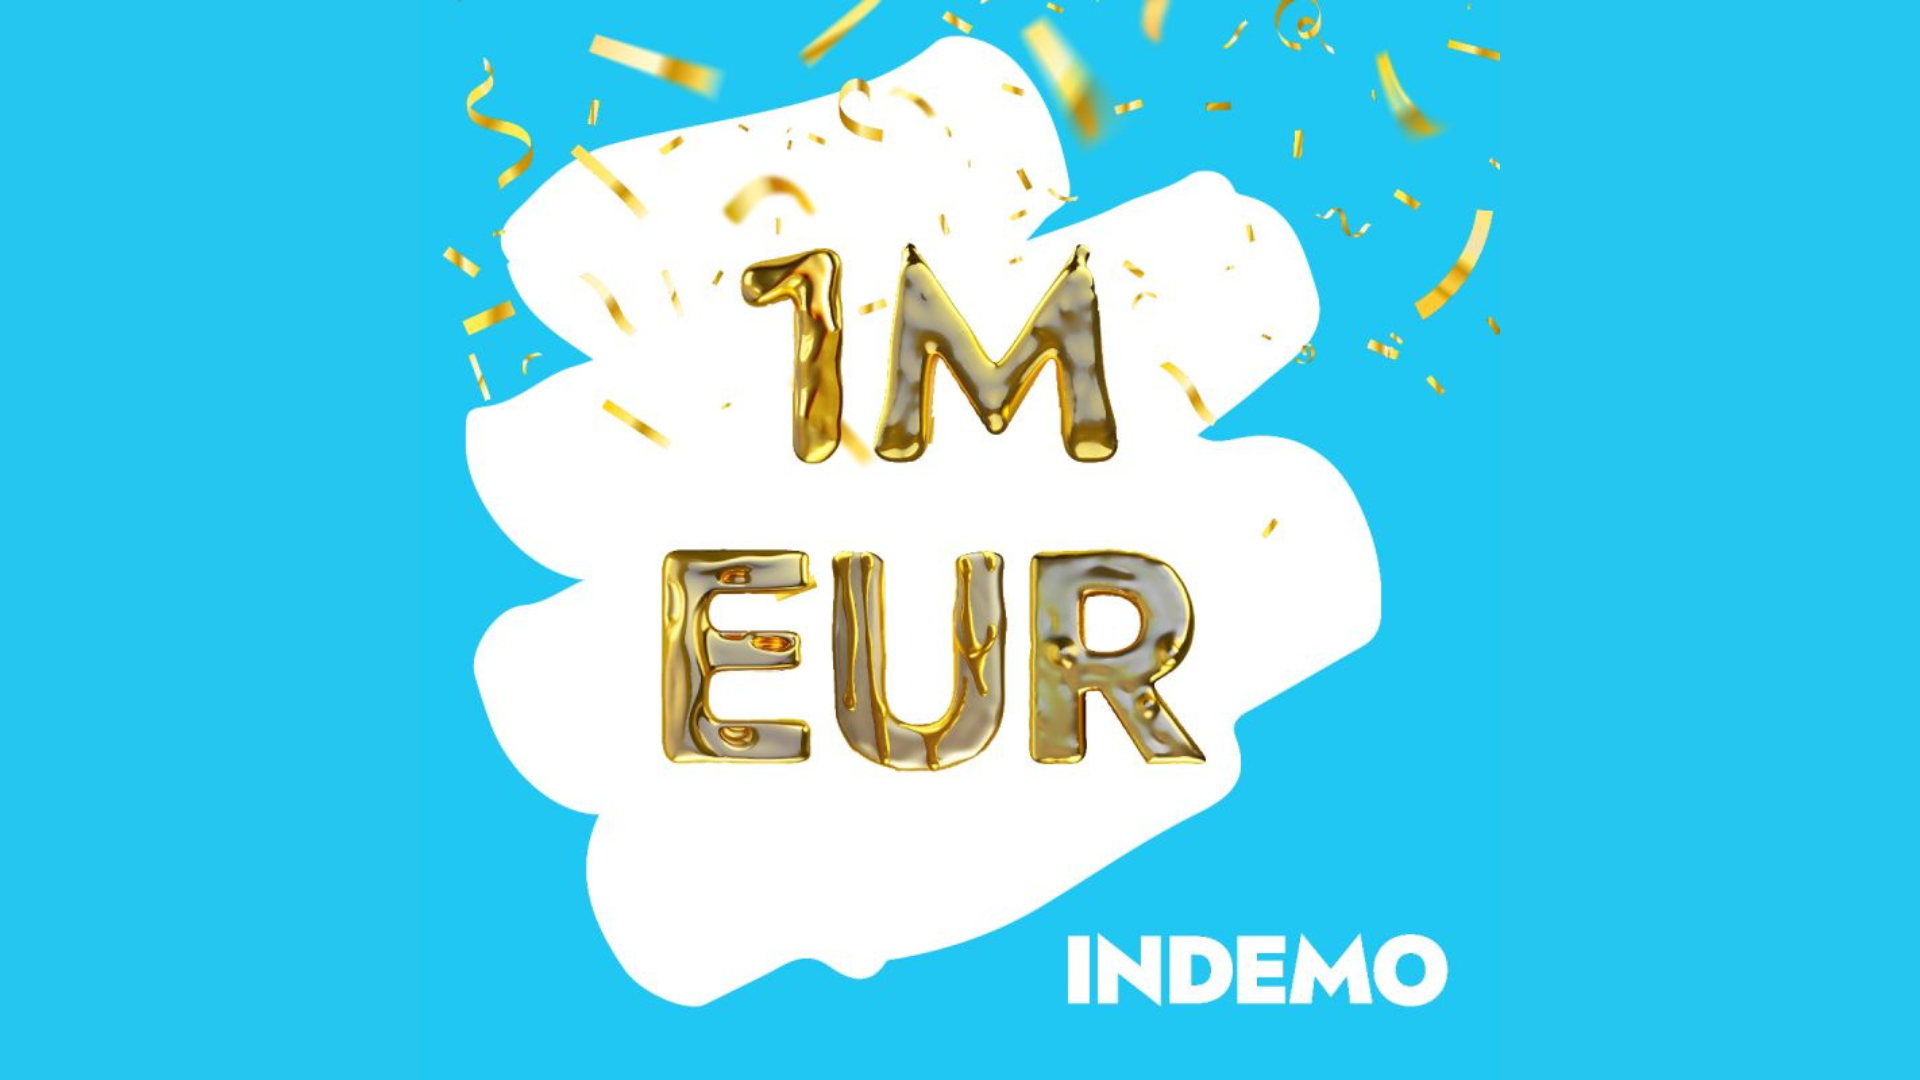 Breaking News: Indemo Surpasses €1,000,000 in Investments! 🎉